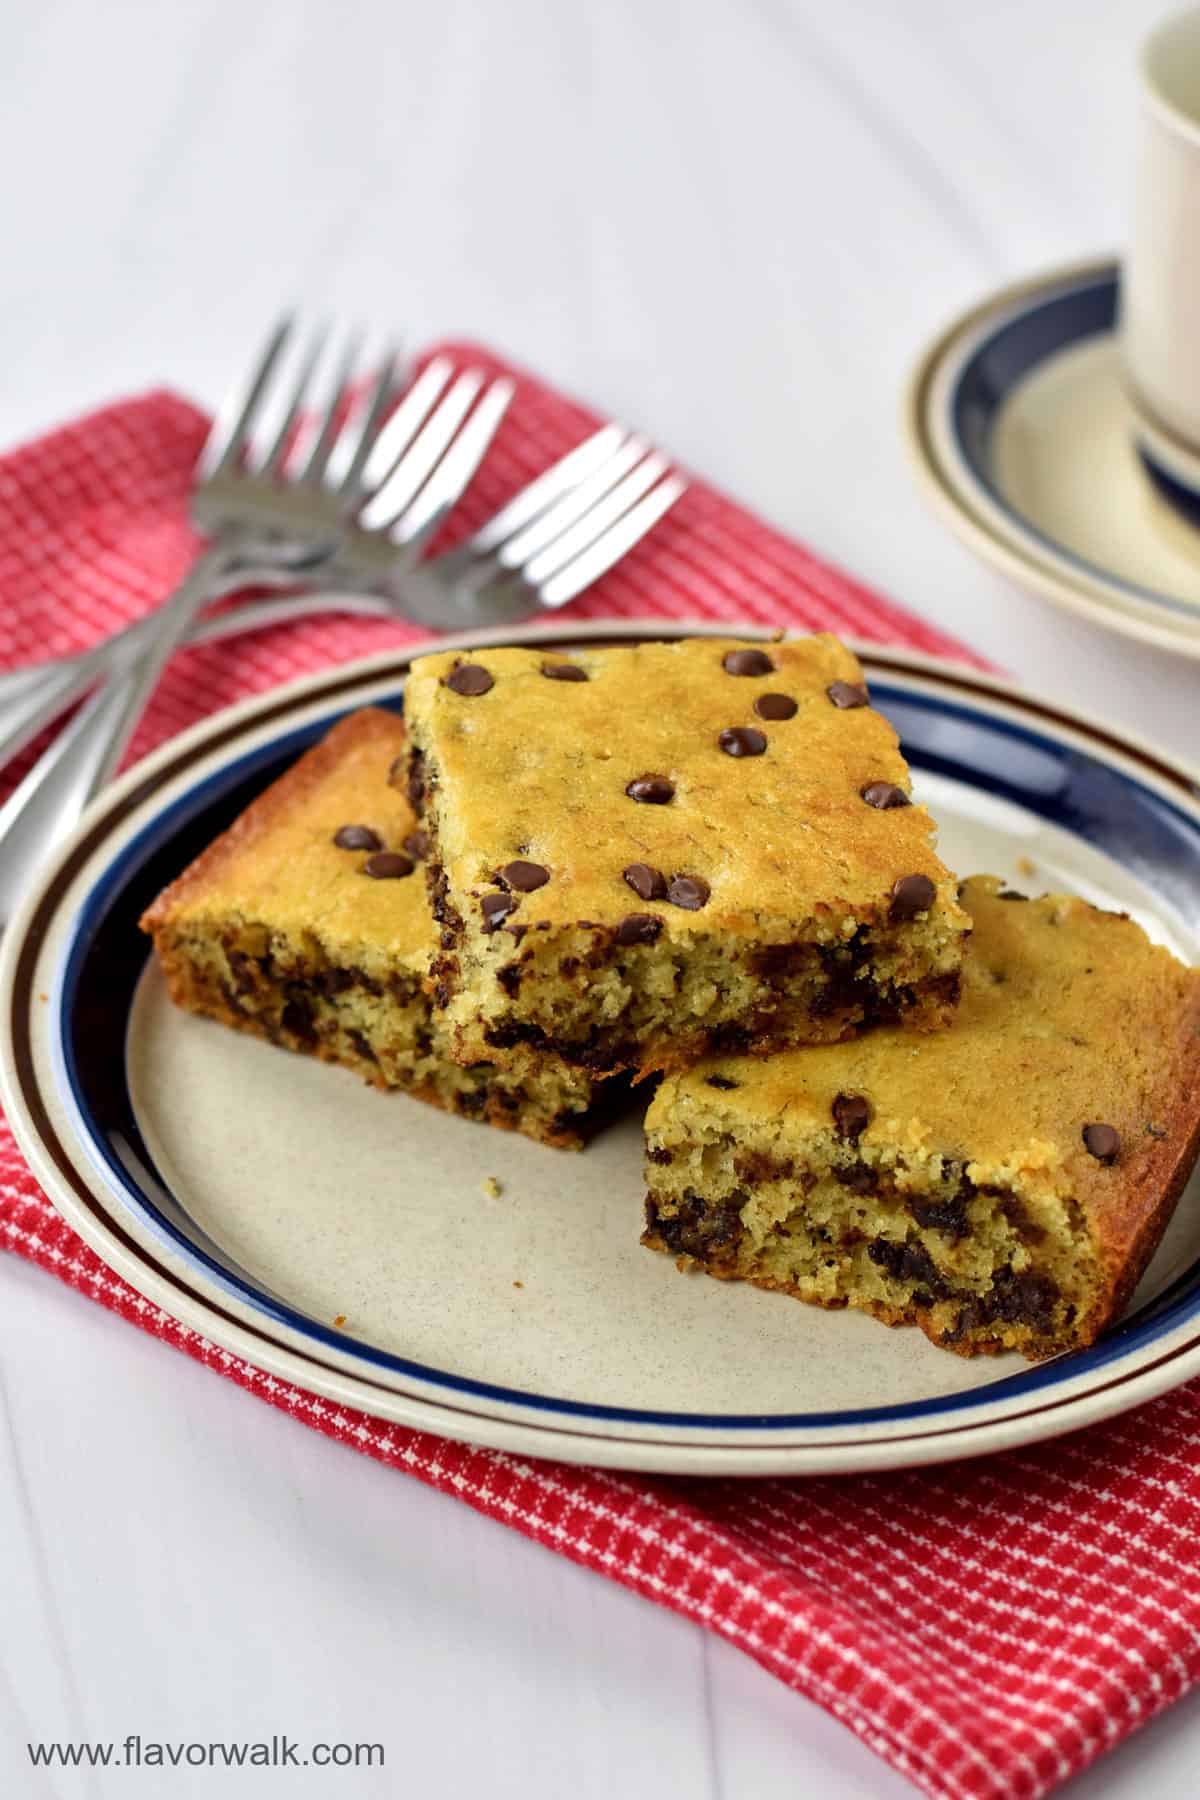 A stack of 3 slices of gluten free snack cake with dessert forks and a coffee cup in the background.